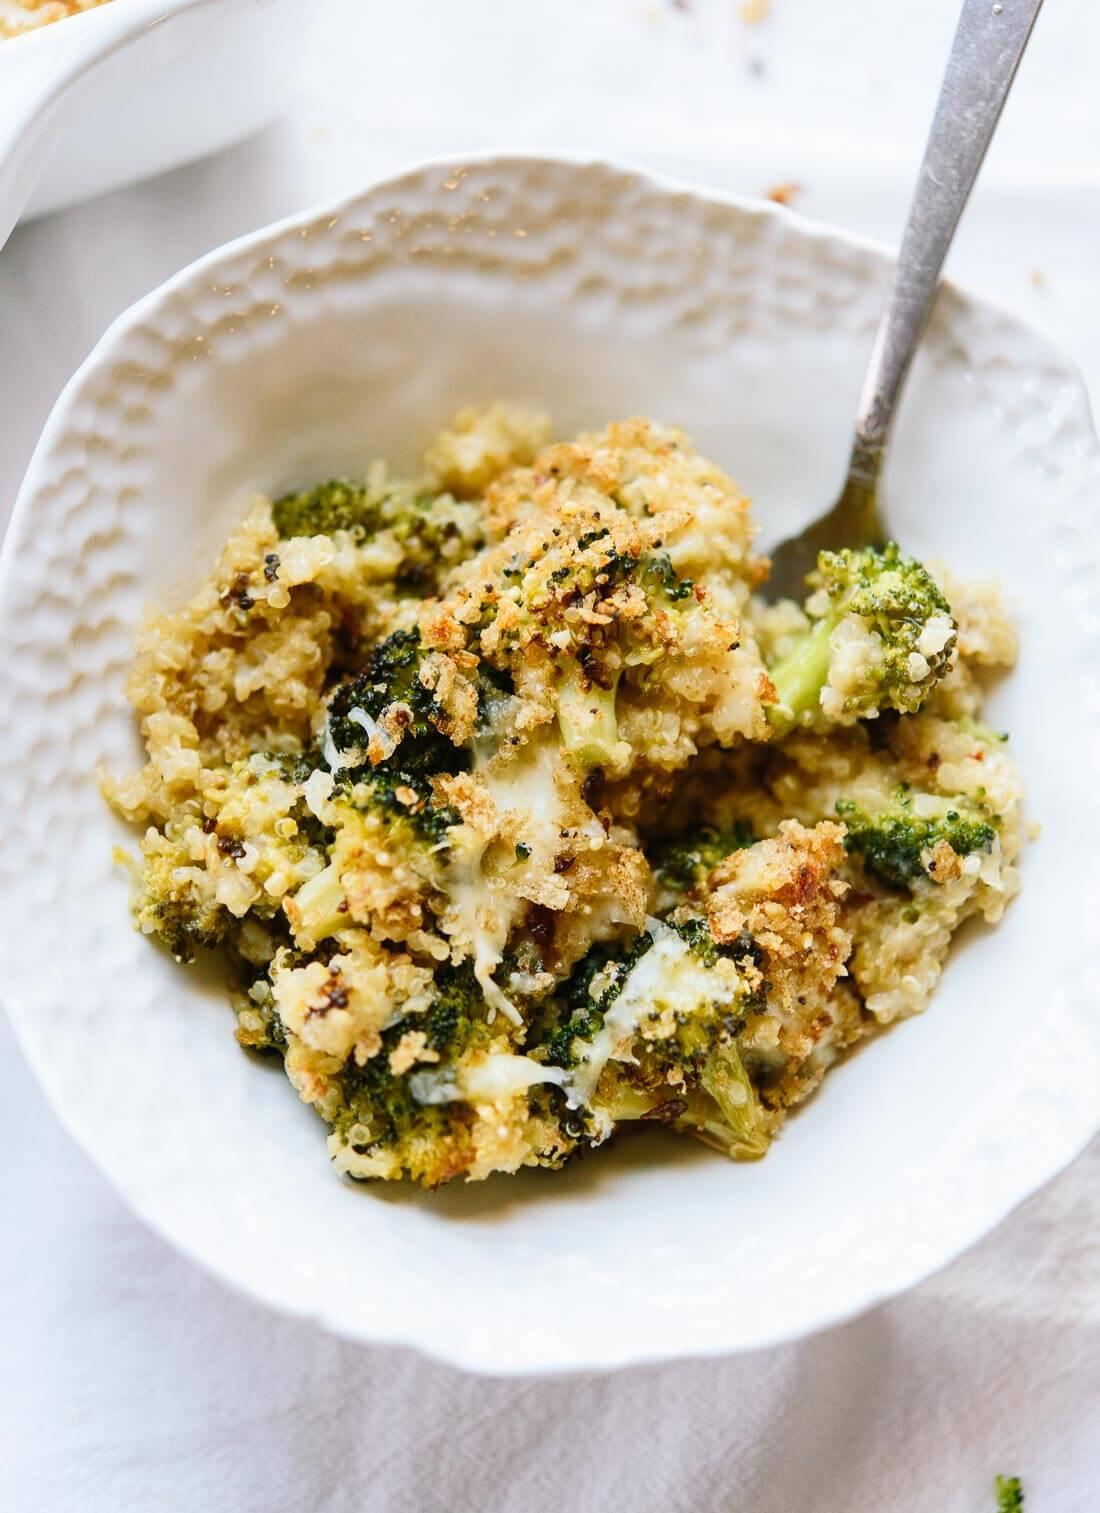 Broccoli casserole, made better with roasted broccoli, cheddar cheese, quinoa and whole grain breadcrumbs. - cookieandkate.com